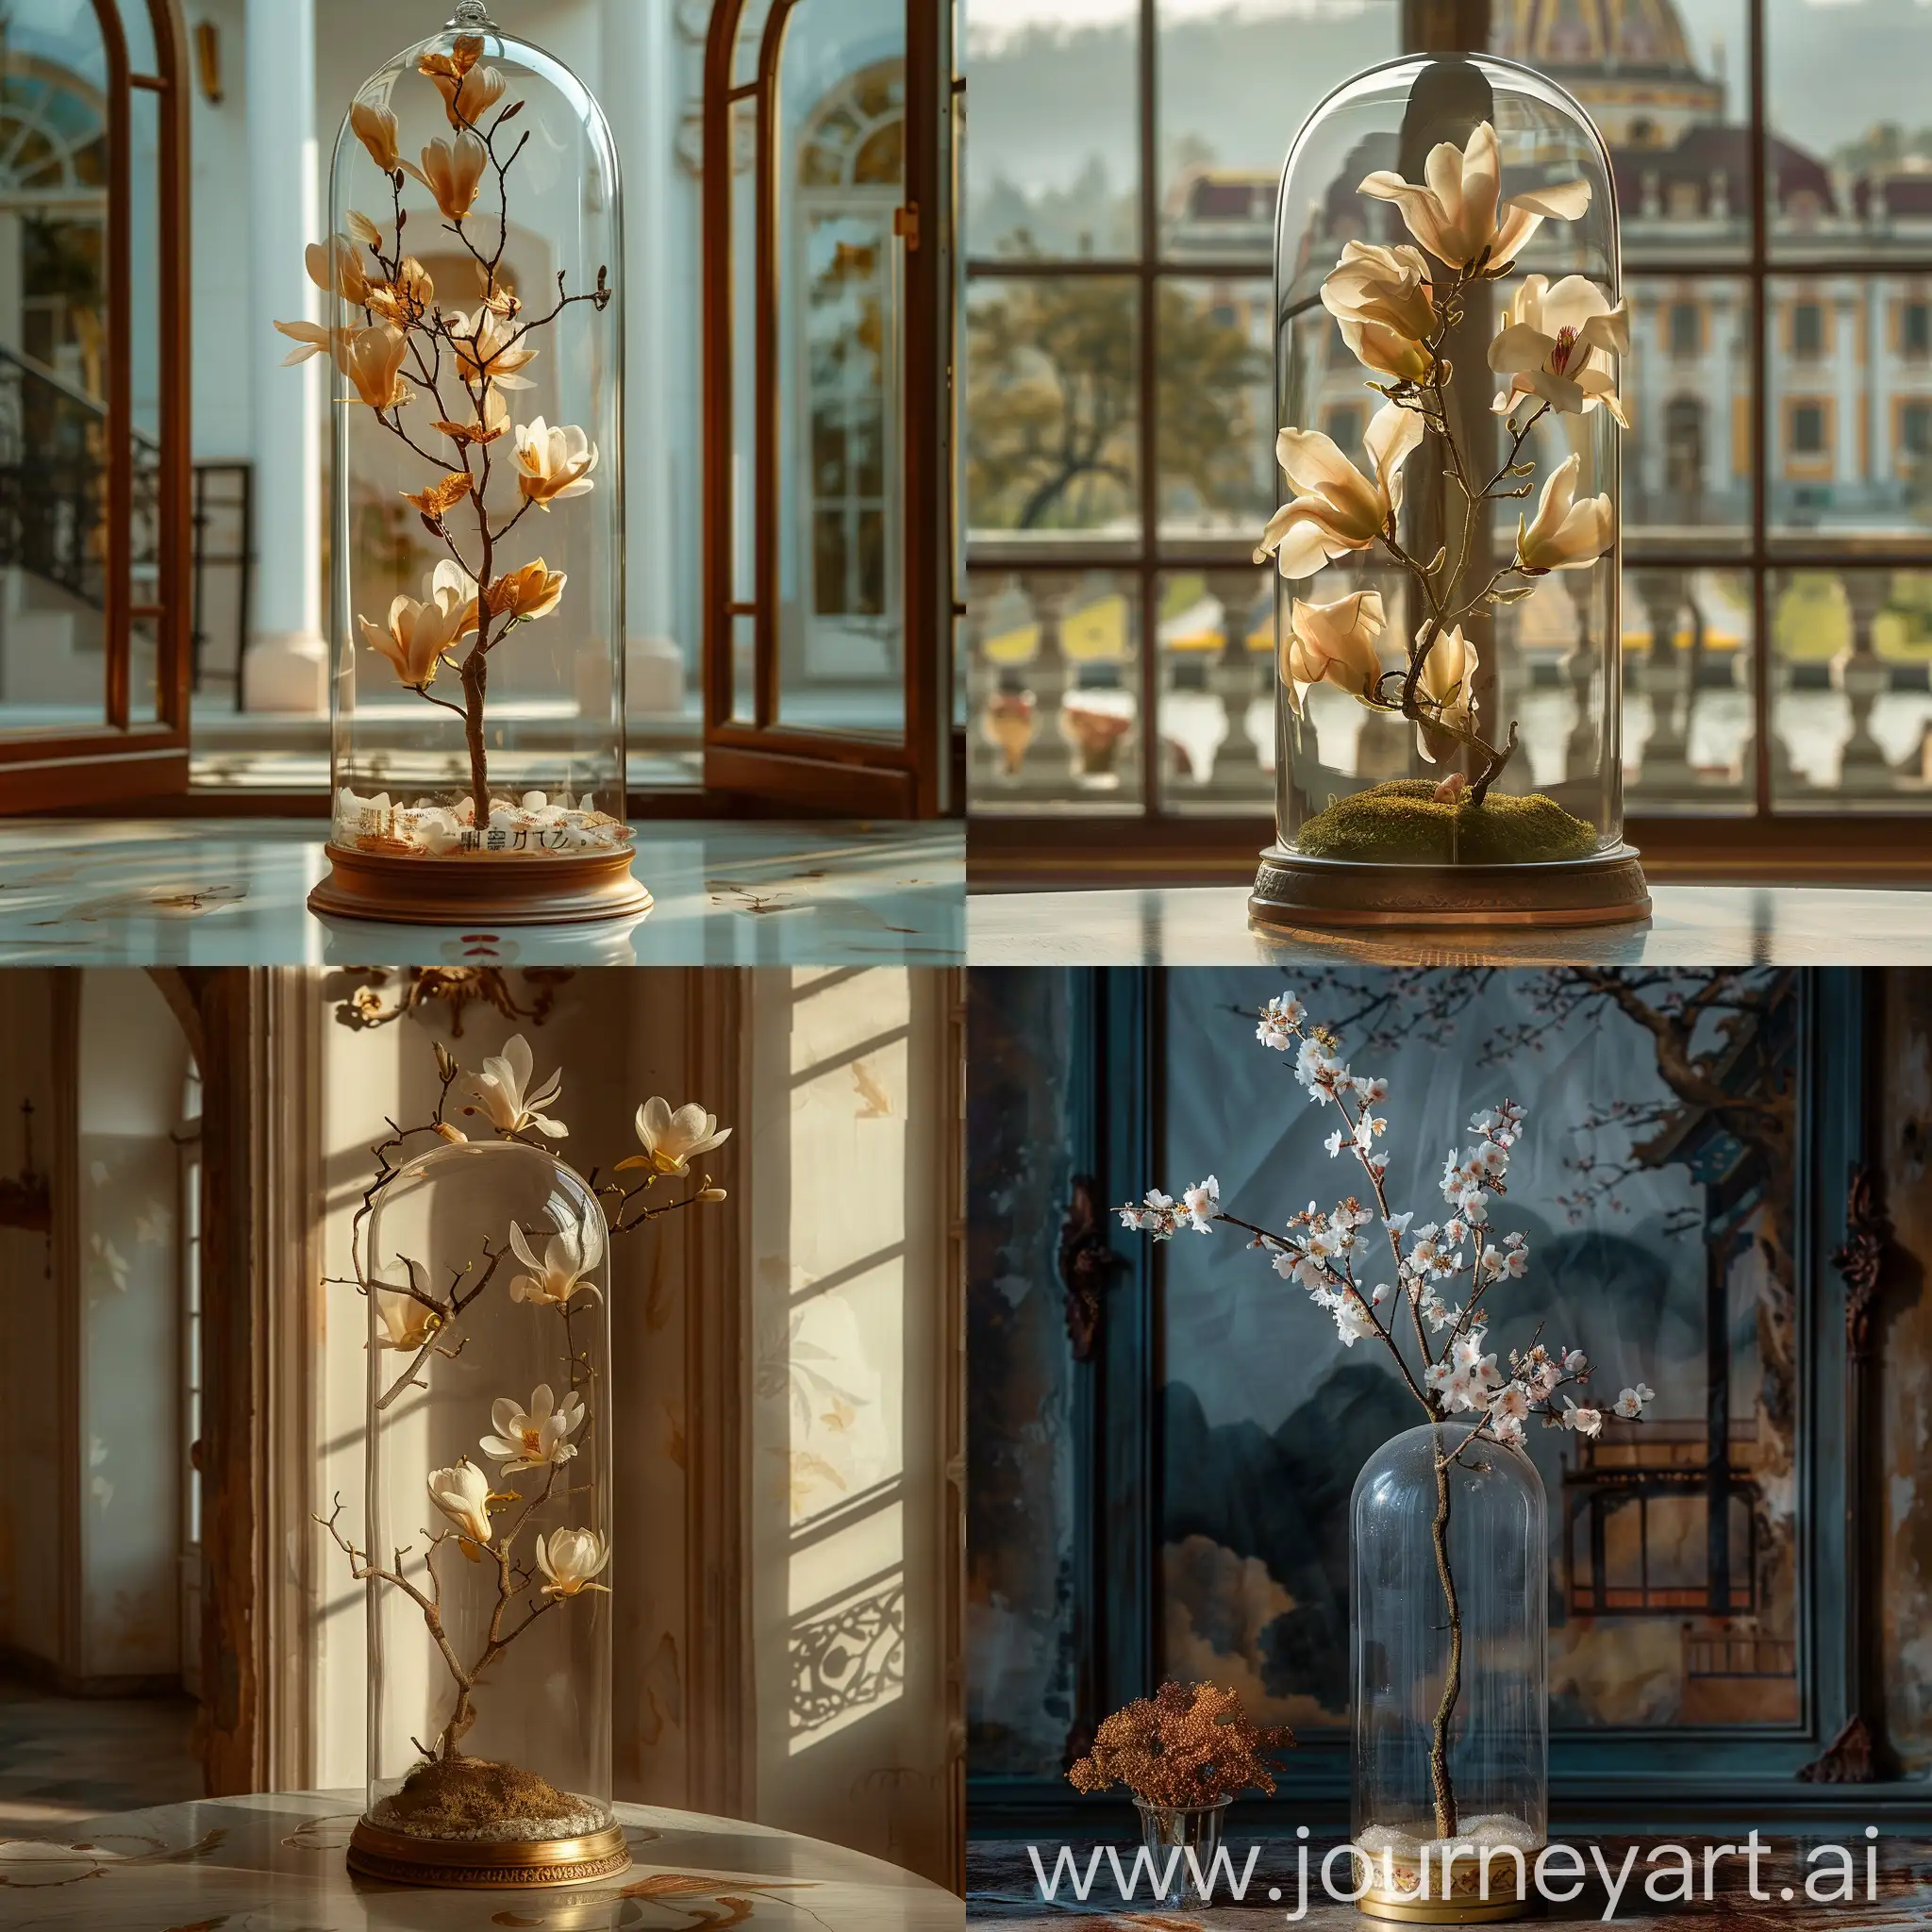 Real and very eye-catching photo of a very beautiful and attractive flower branch in a tall dome-shaped glass with a beautiful base, matte background of a beautiful royal house, morning, masterpiece, beauty in every sense, professional photography, real, dreamy,